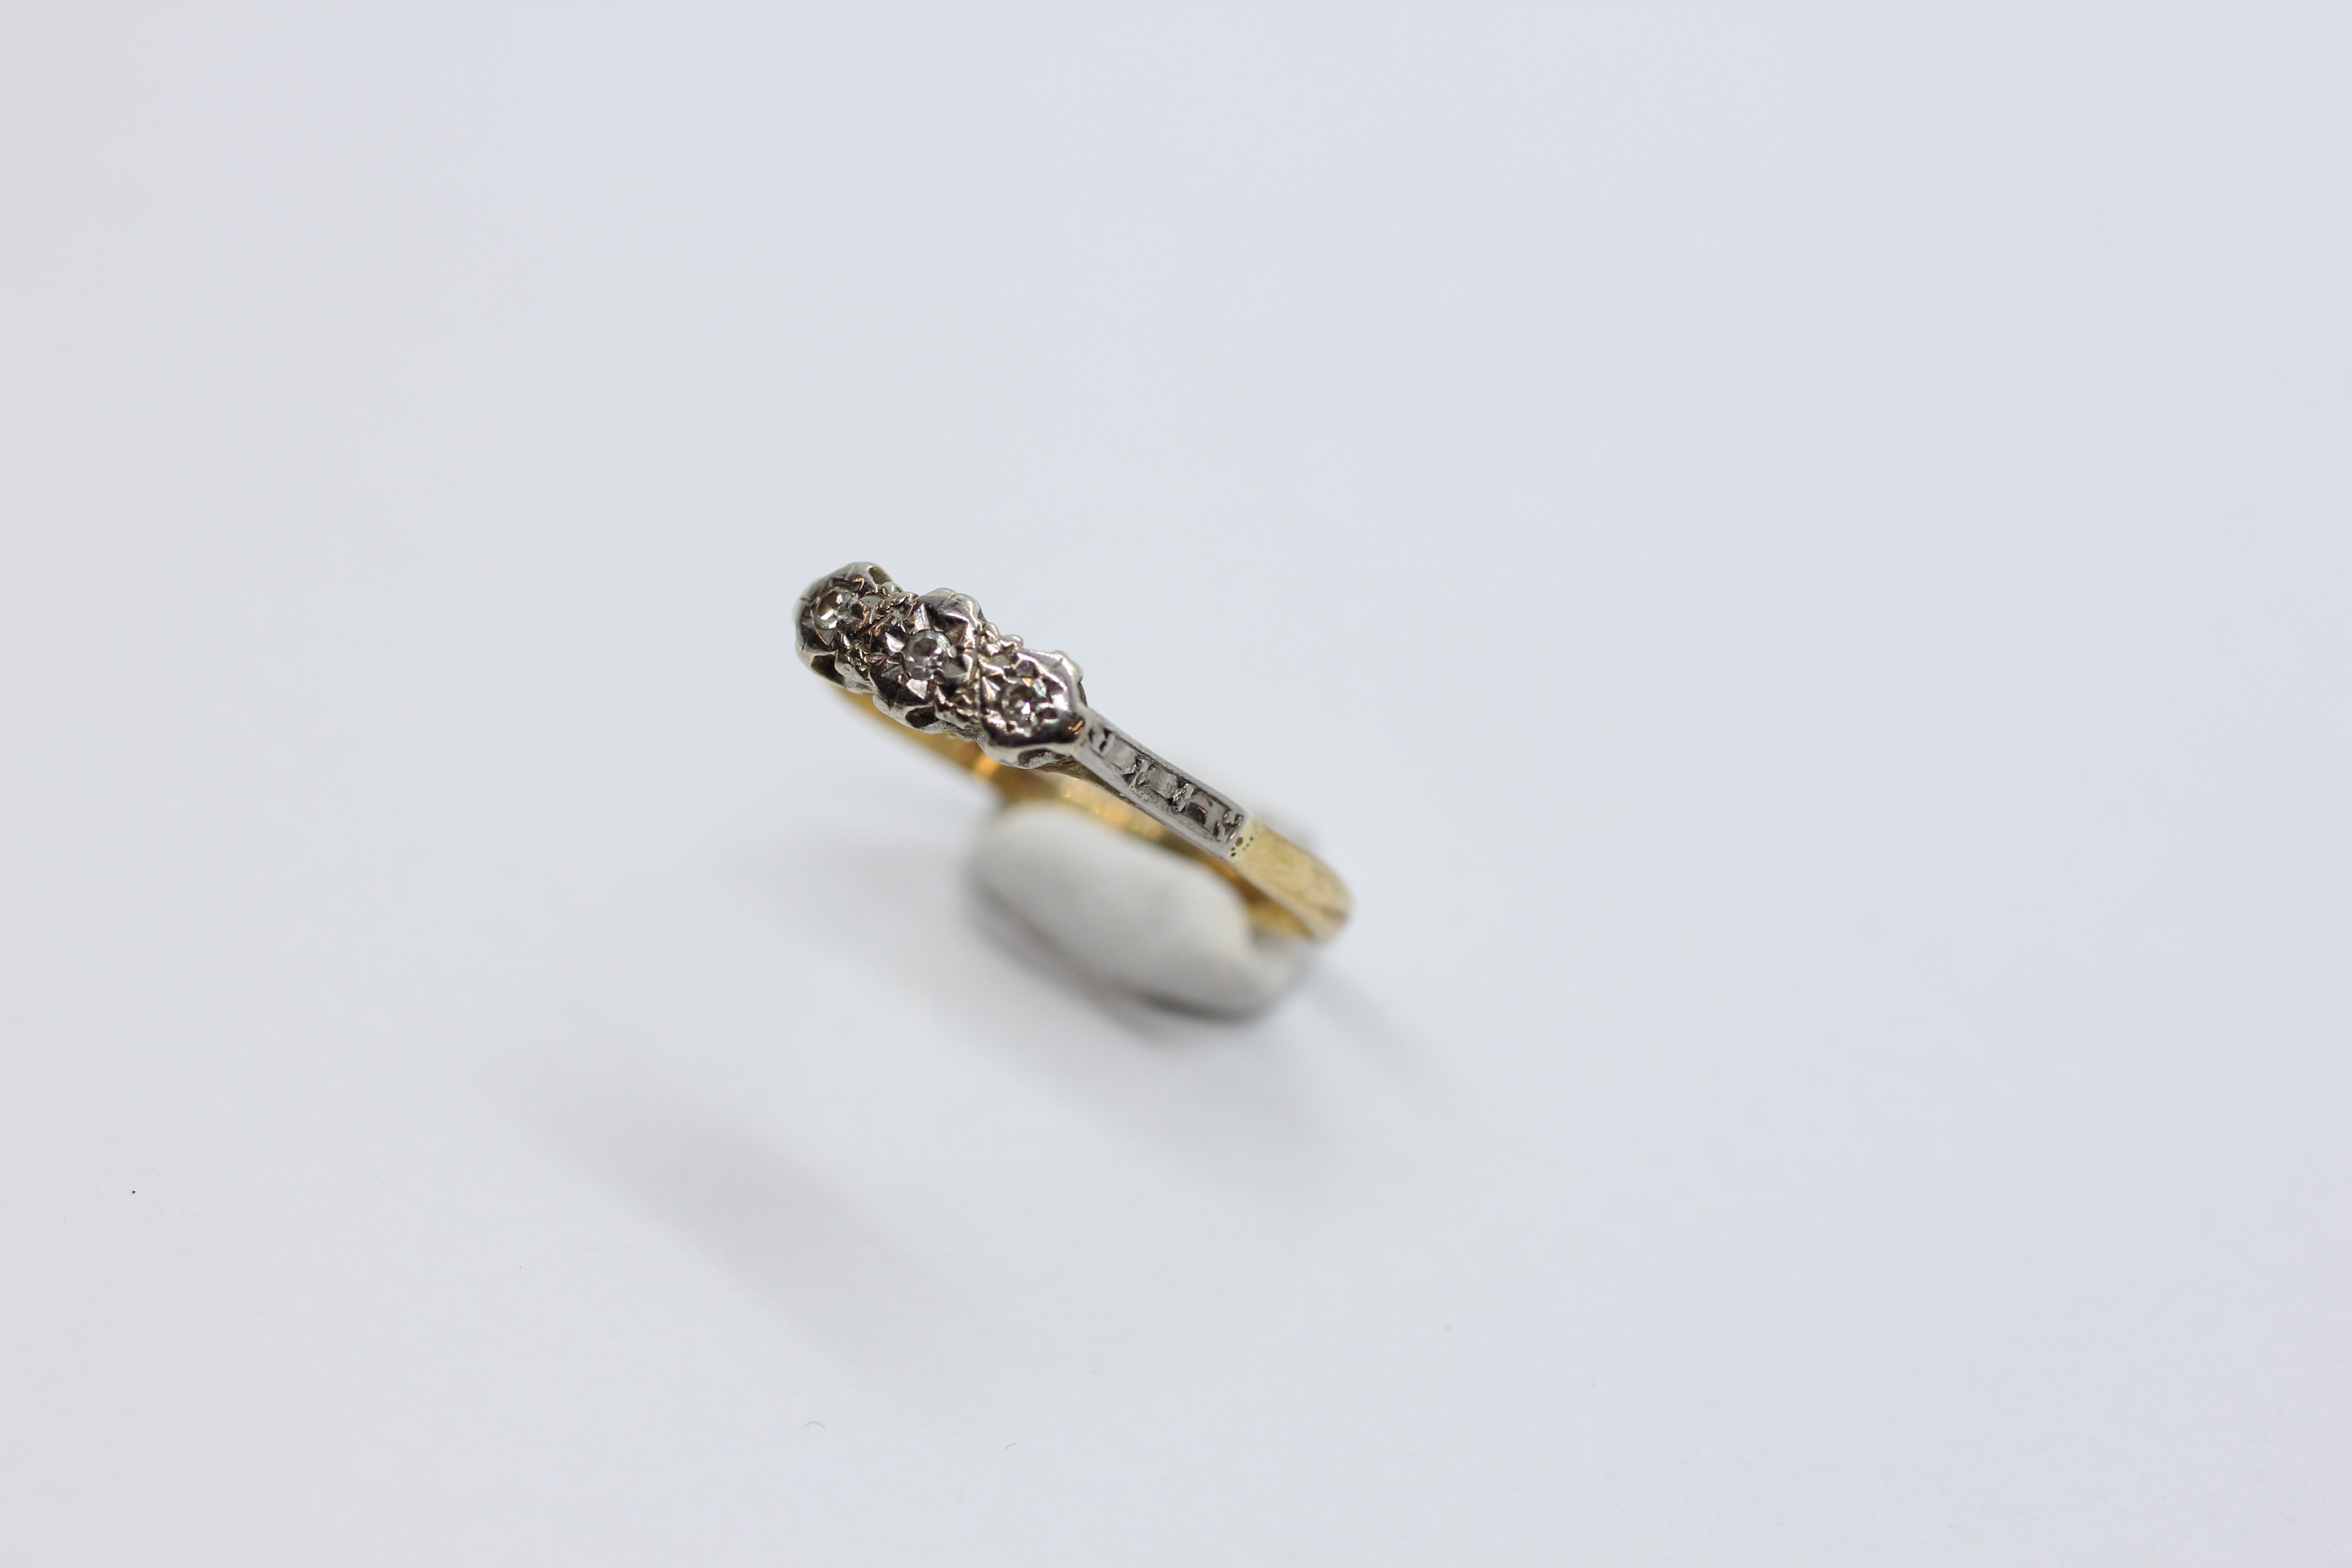 AN 18CT GOLD AND PLATINUM 3 STONE DIAMOND RING. - Image 2 of 8